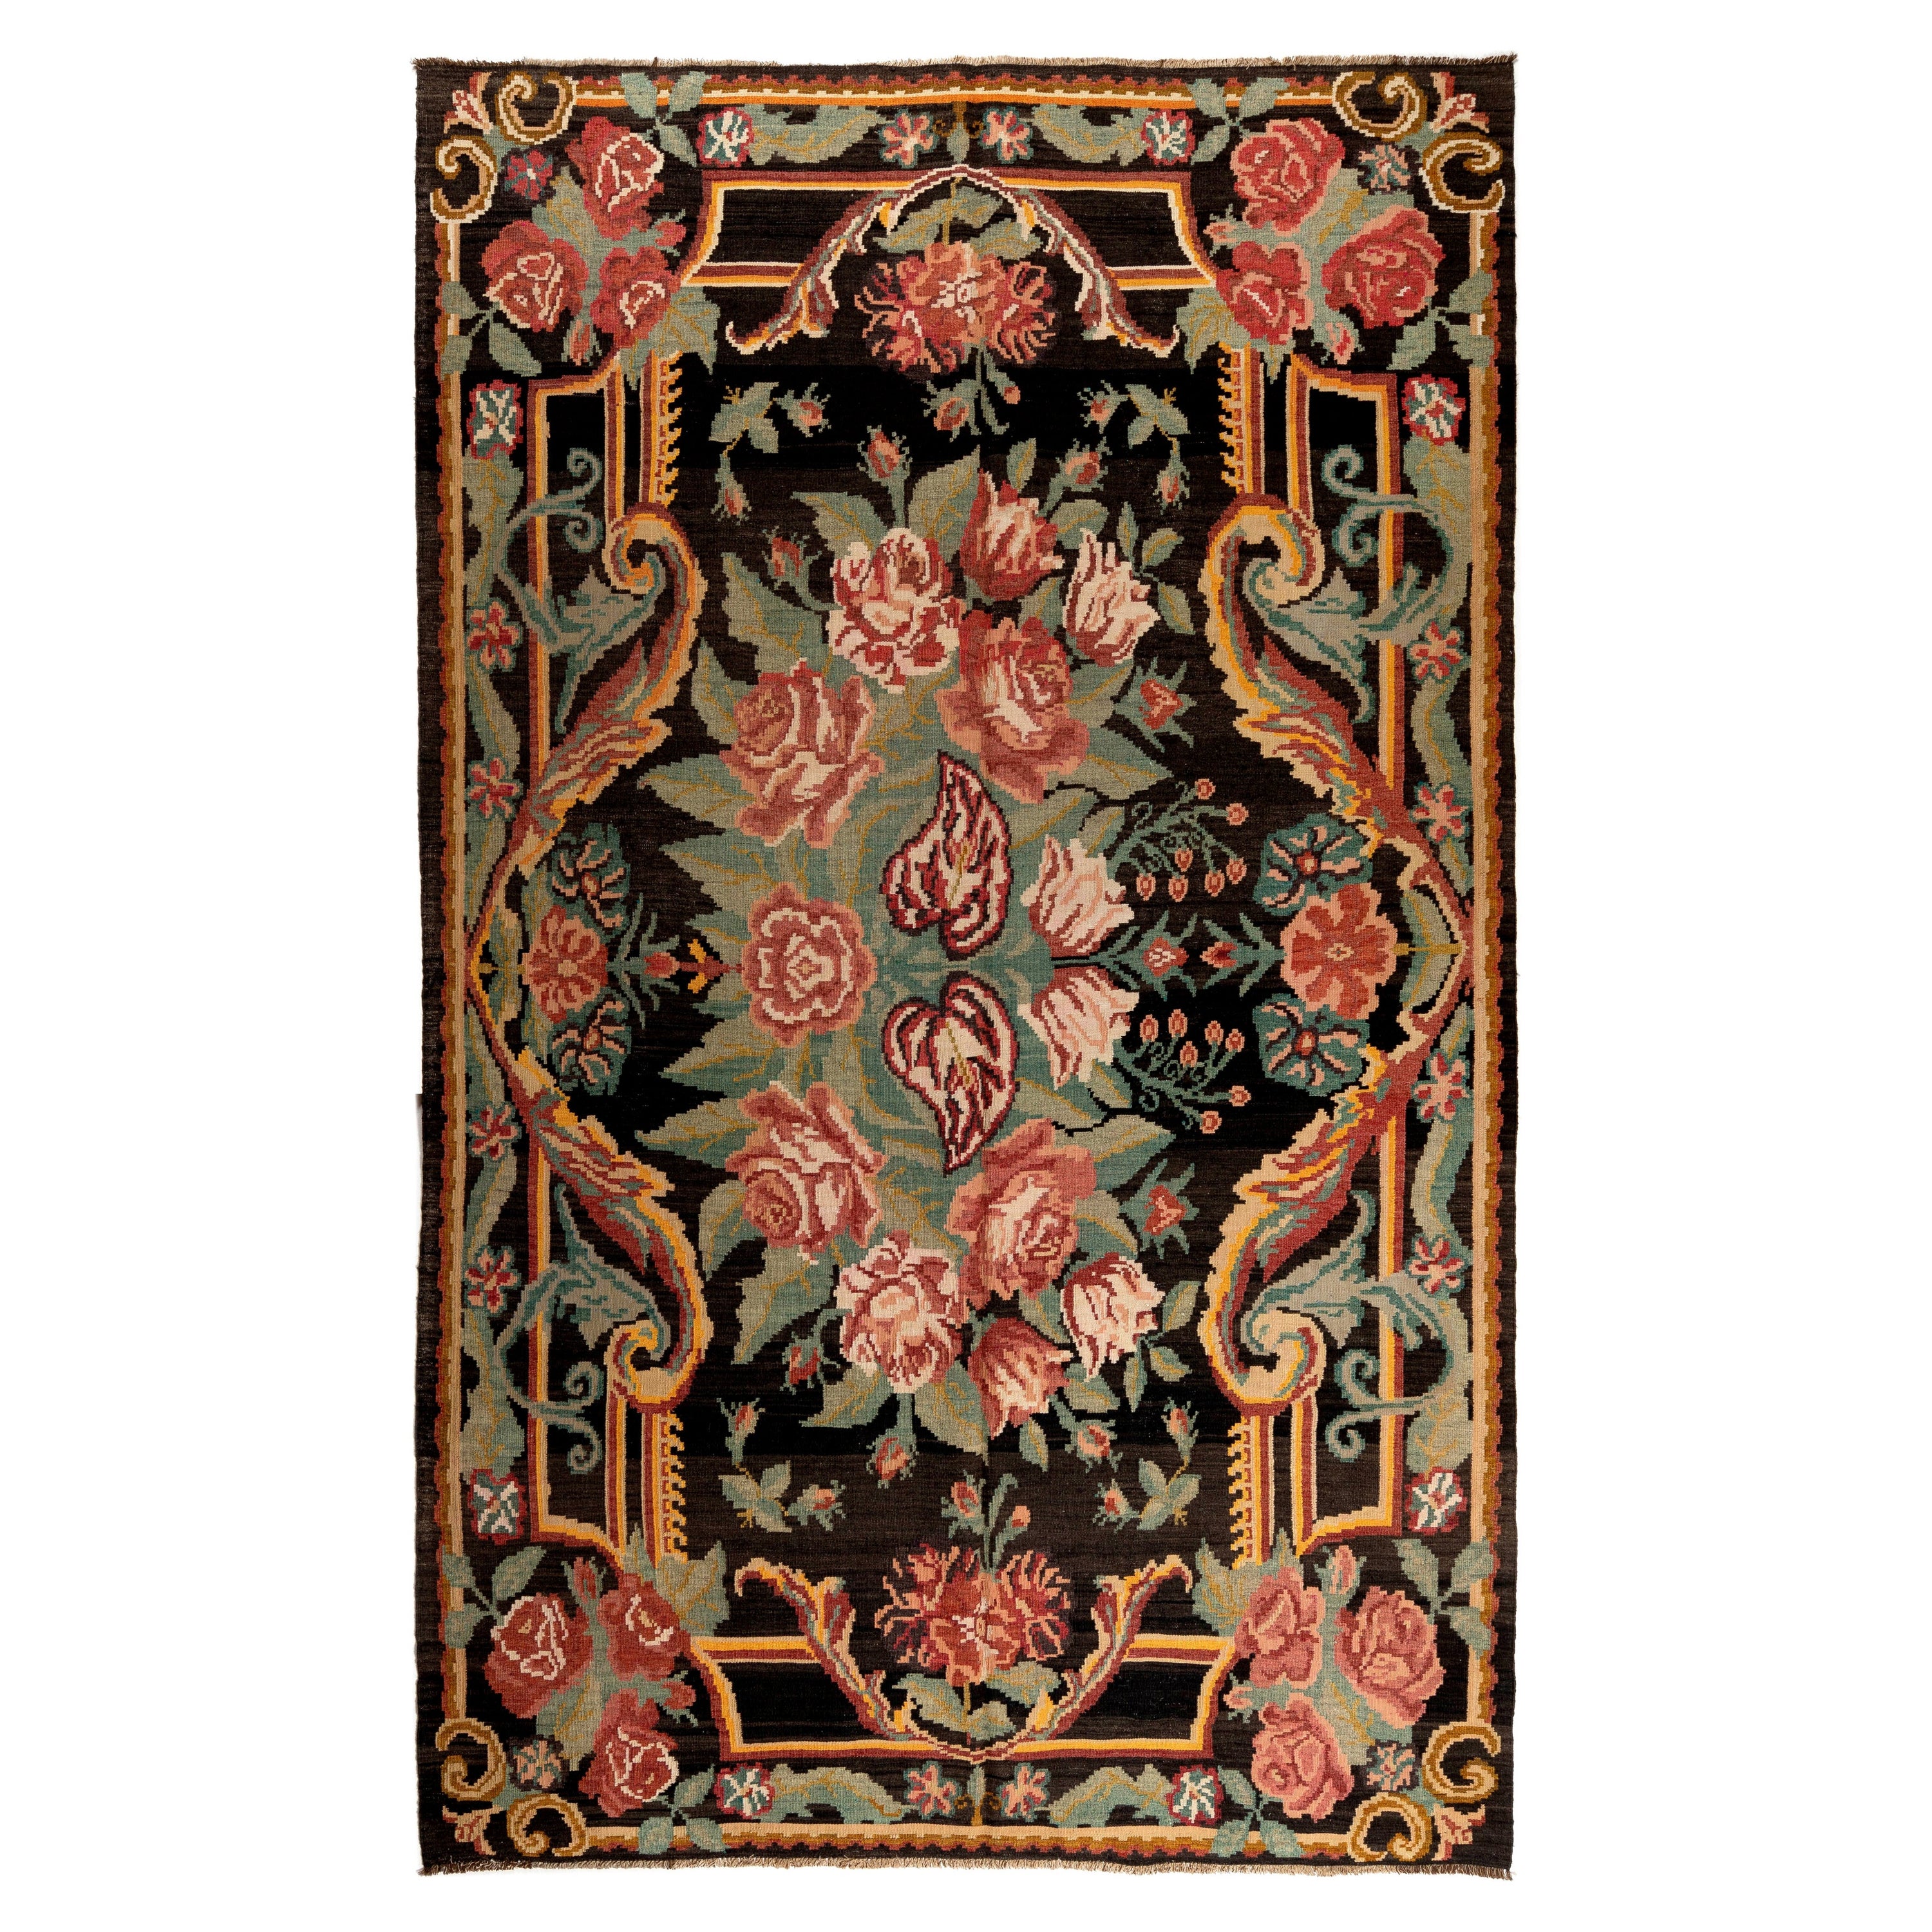 6.8x11 Ft Floral Pattern Tapestry, Bessarabian Kilim, Hand-Woven Rug, All Wool For Sale